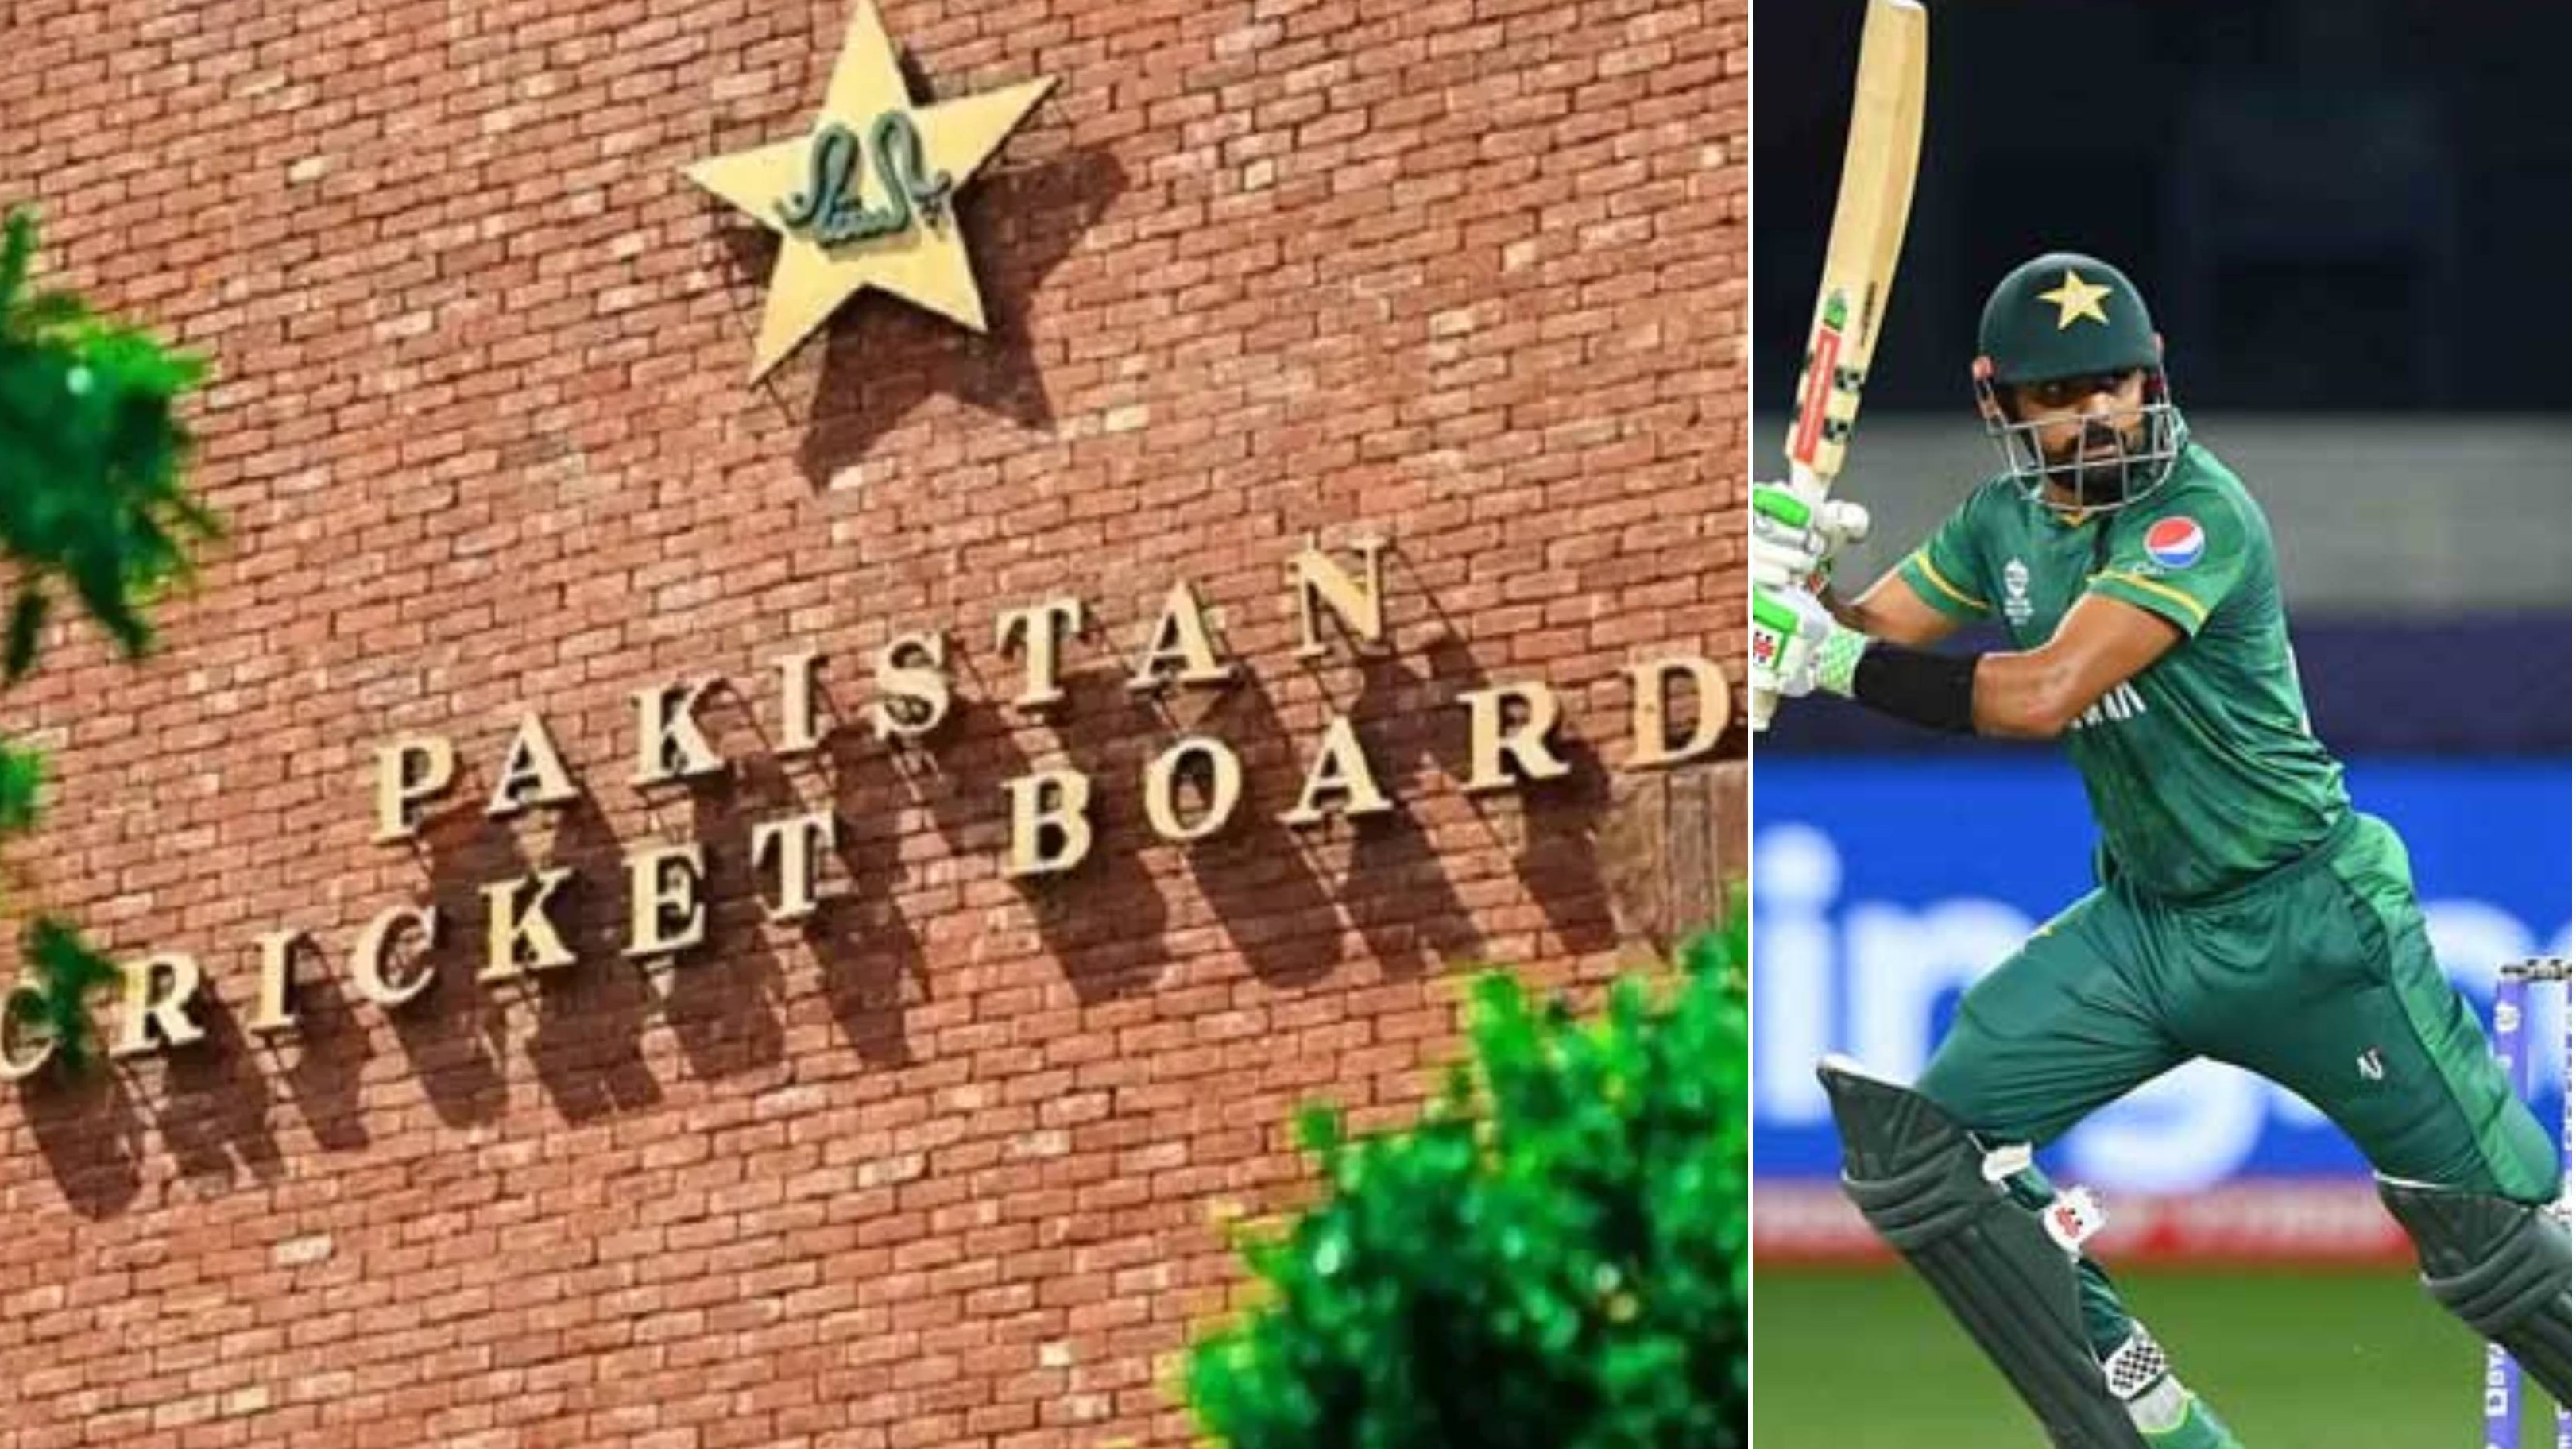 “Unsubstantiated personal allegations,” PCB’s strong response to Babar Azam's alleged leaked videos, chats and audio